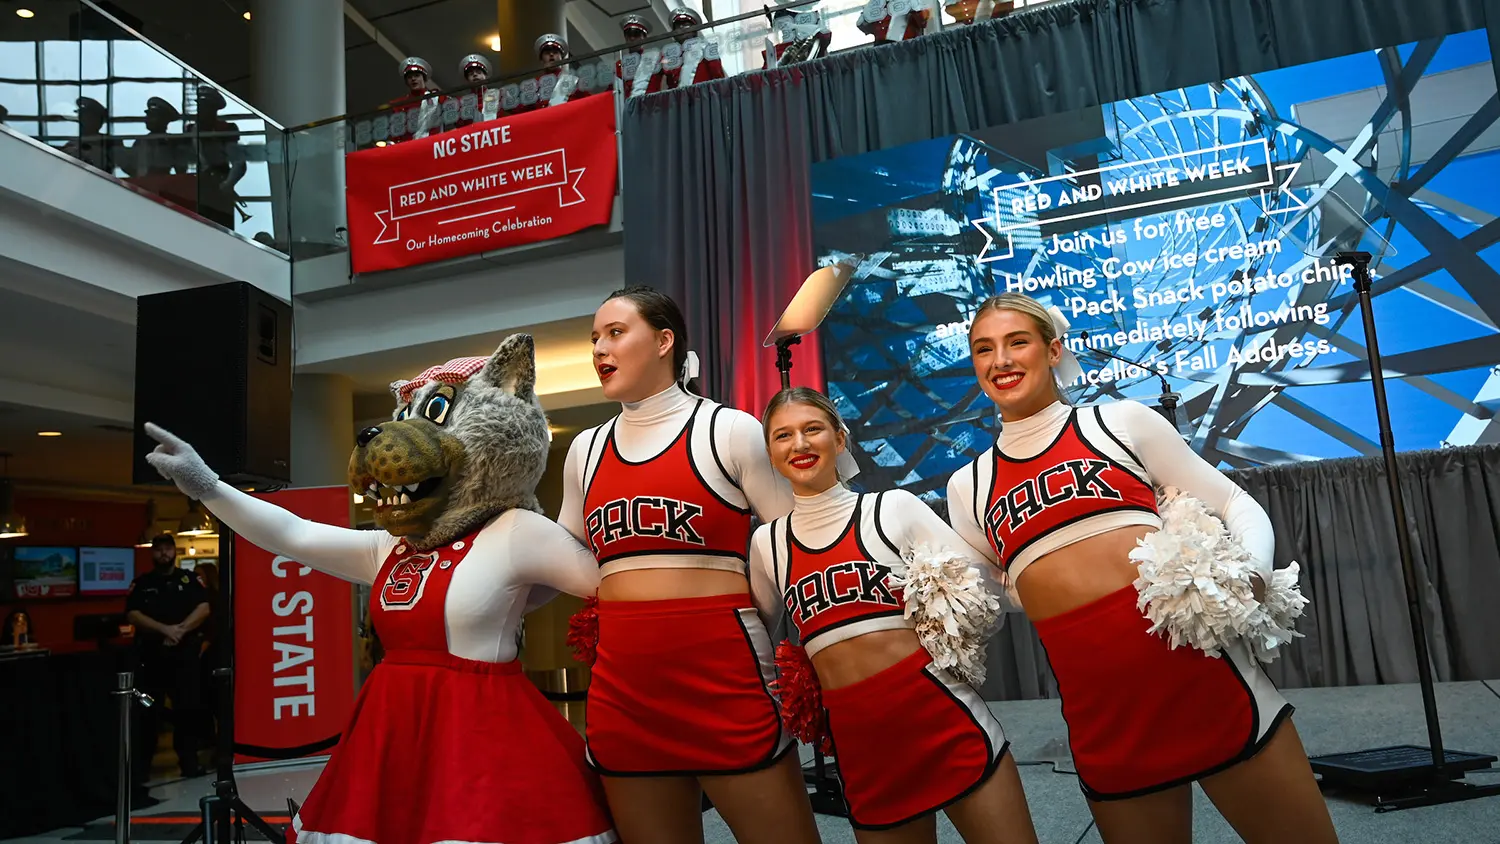 Cheerleaders lead the crowd in singing the alma mater during a Red and White Week event.